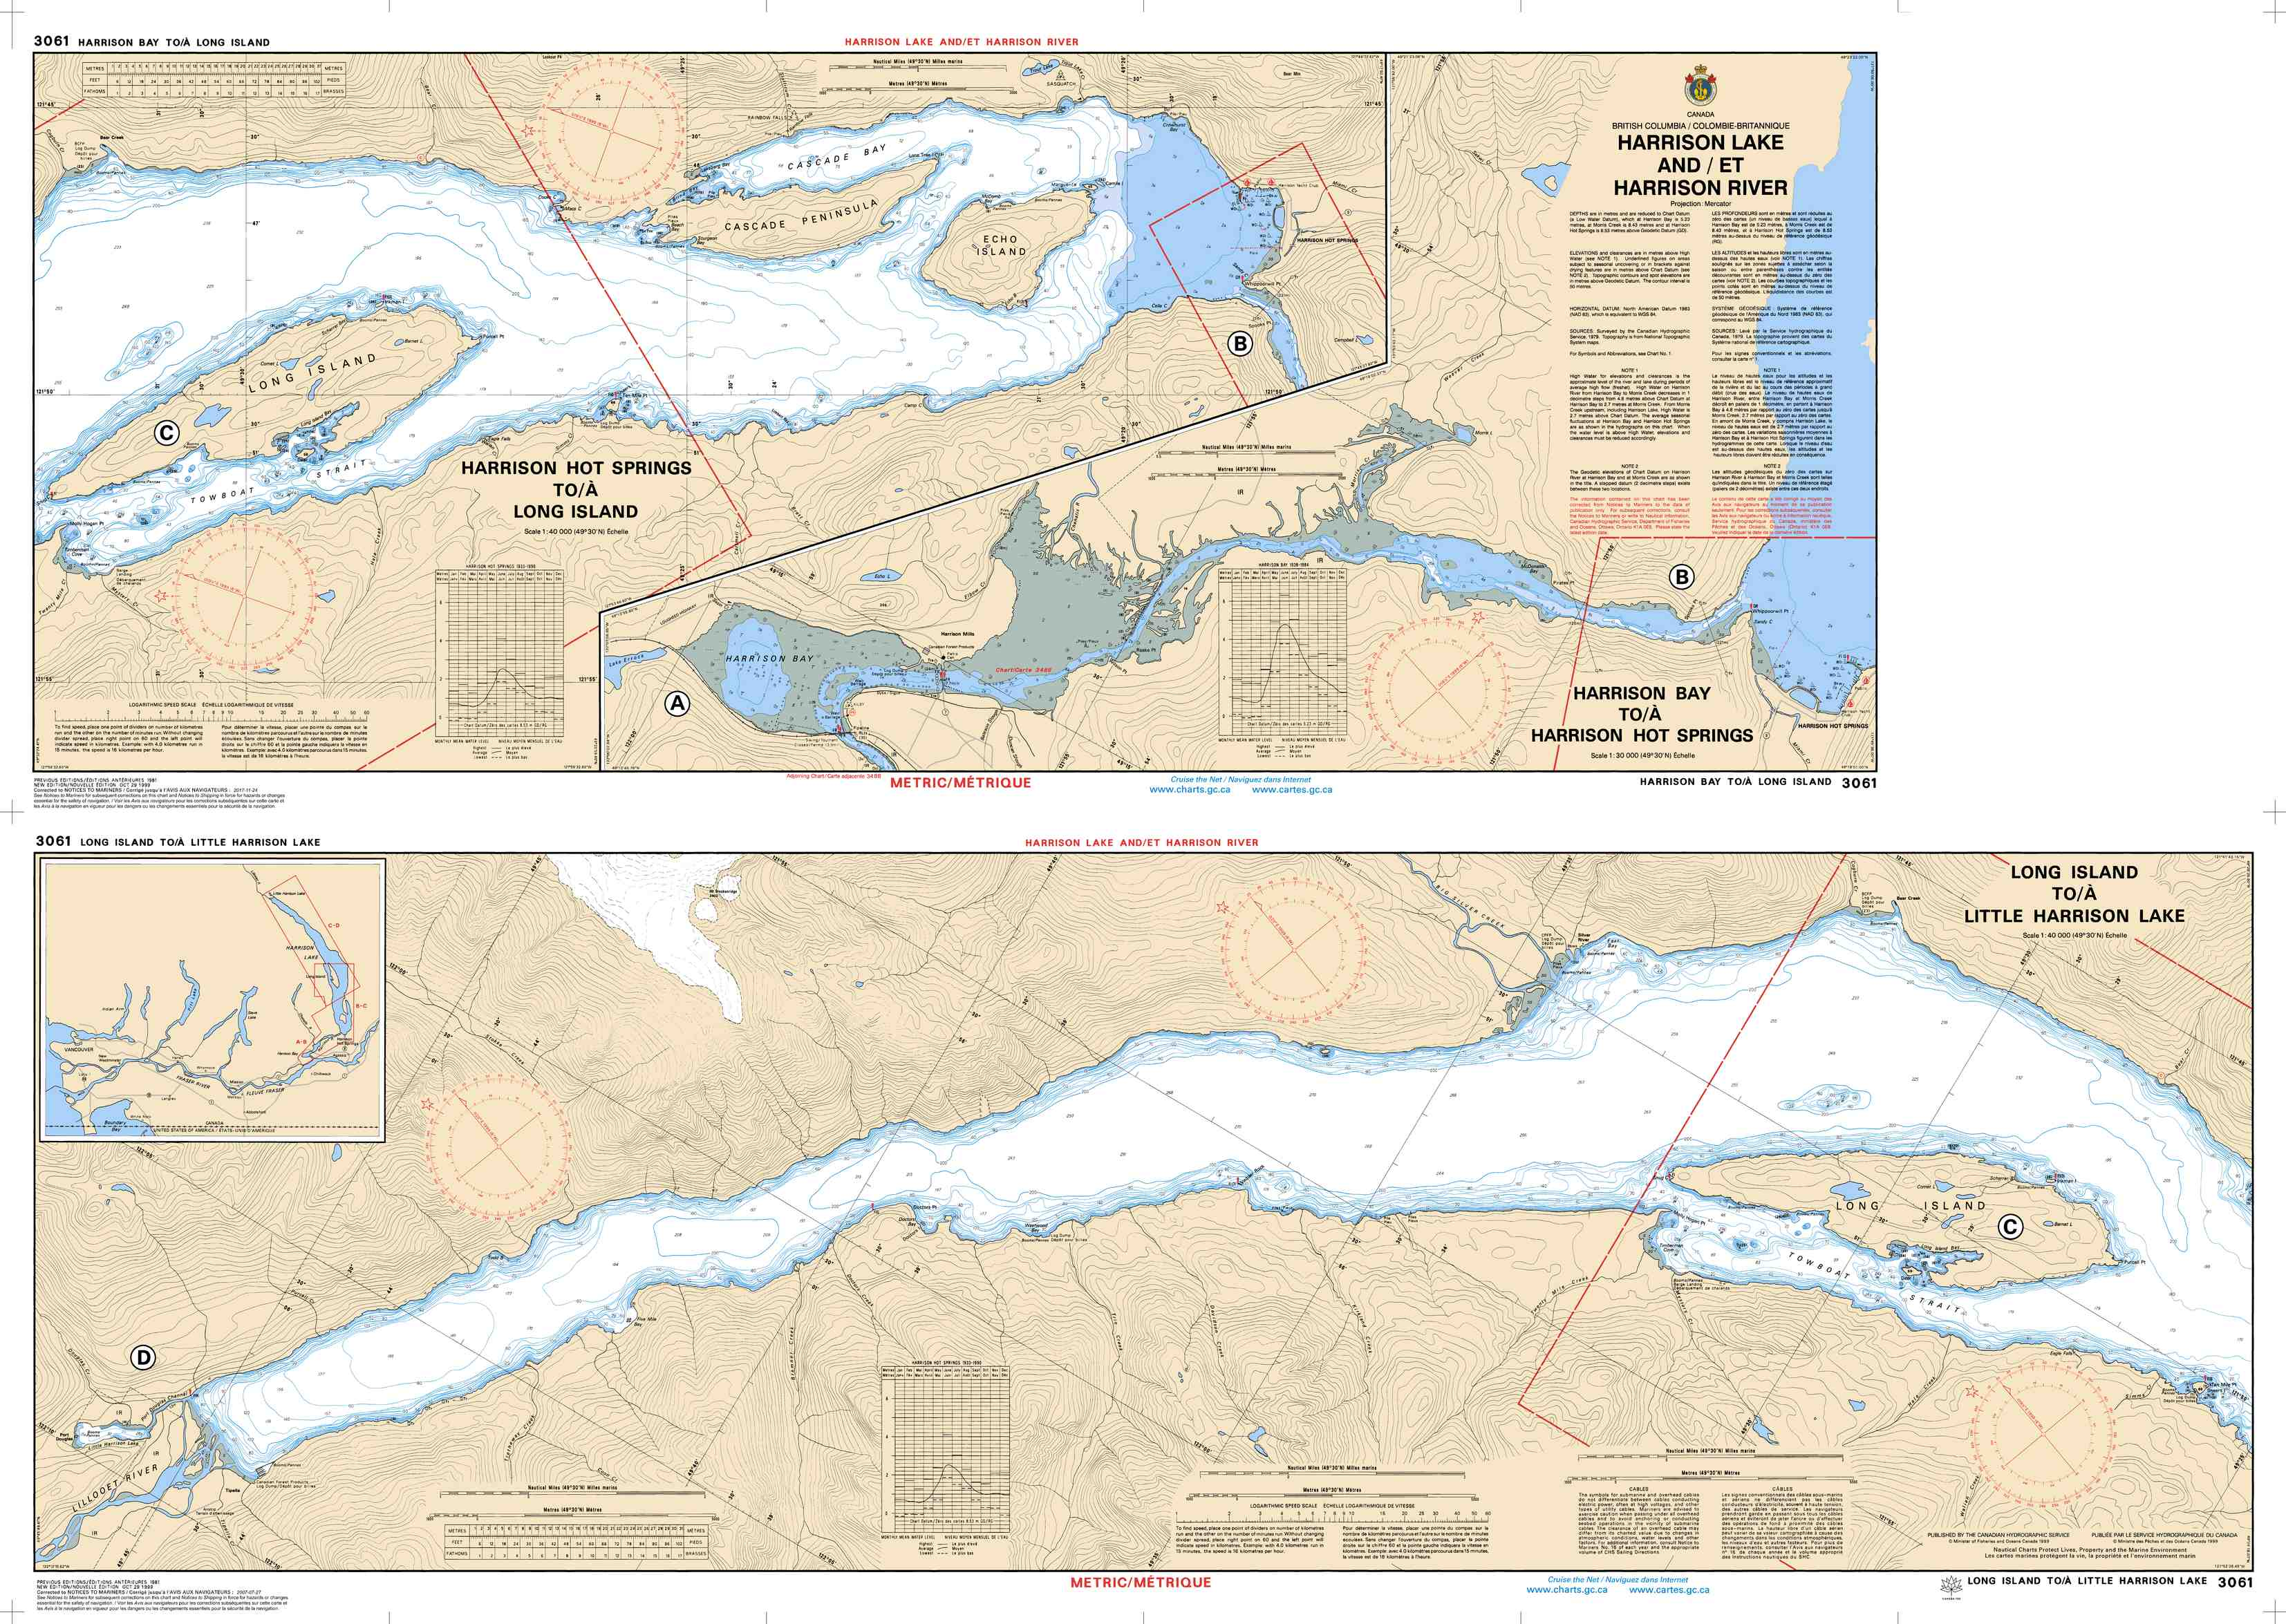 Canadian Hydrographic Service Nautical Chart CHS3061: Harrison Lake and/et Harrison River